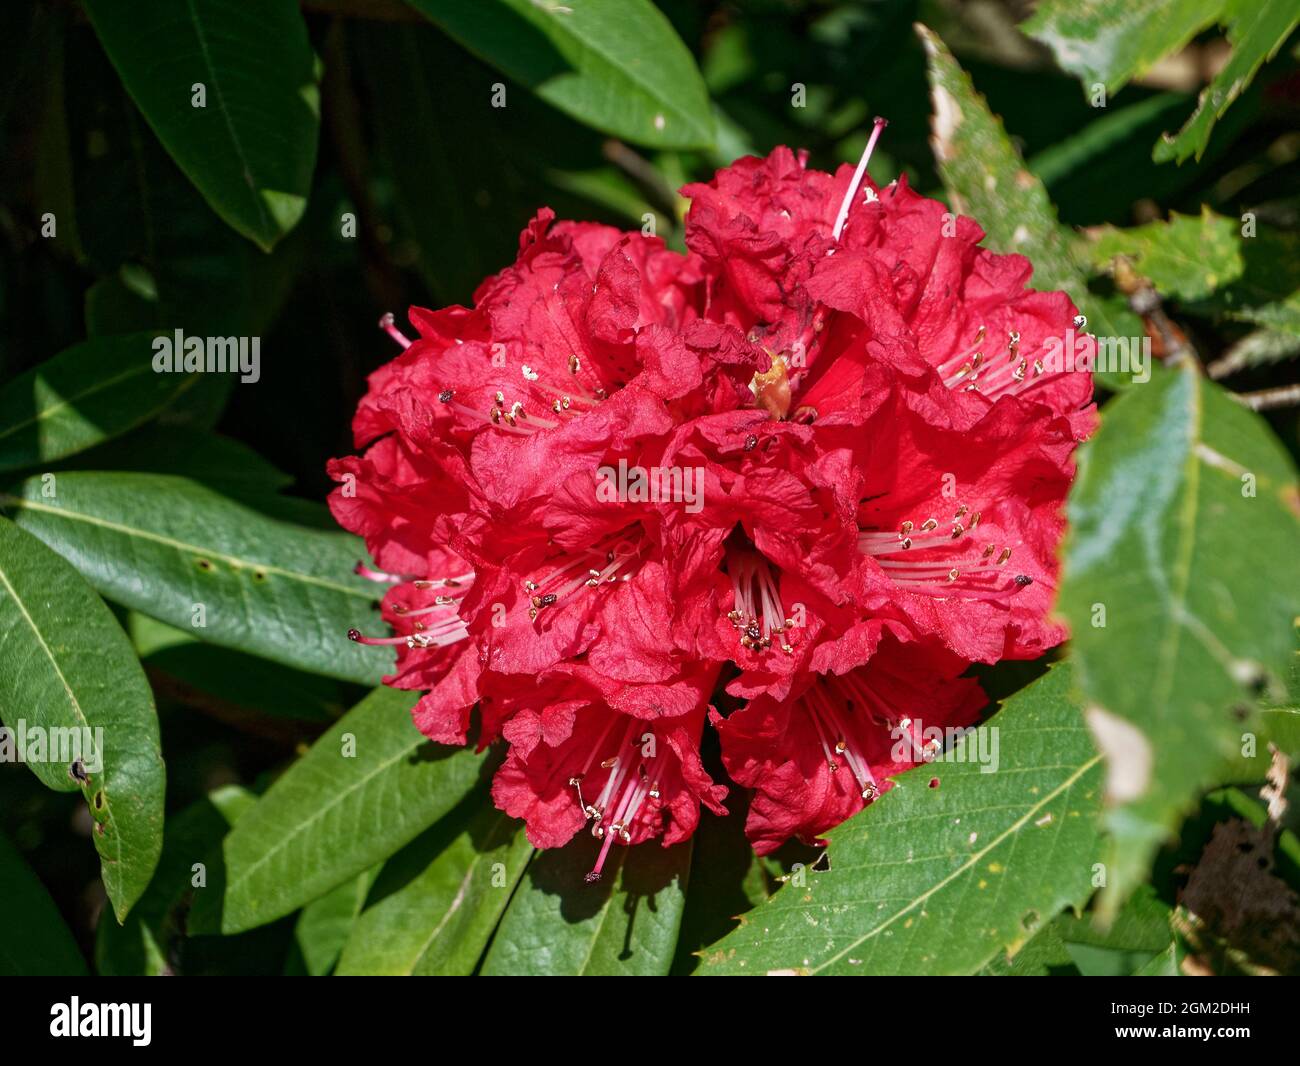 Red flowers Rhododendron ( Ericaceae) in Himalayan mountain at Kausani state Uttarakhand India March 11 2020 Stock Photo